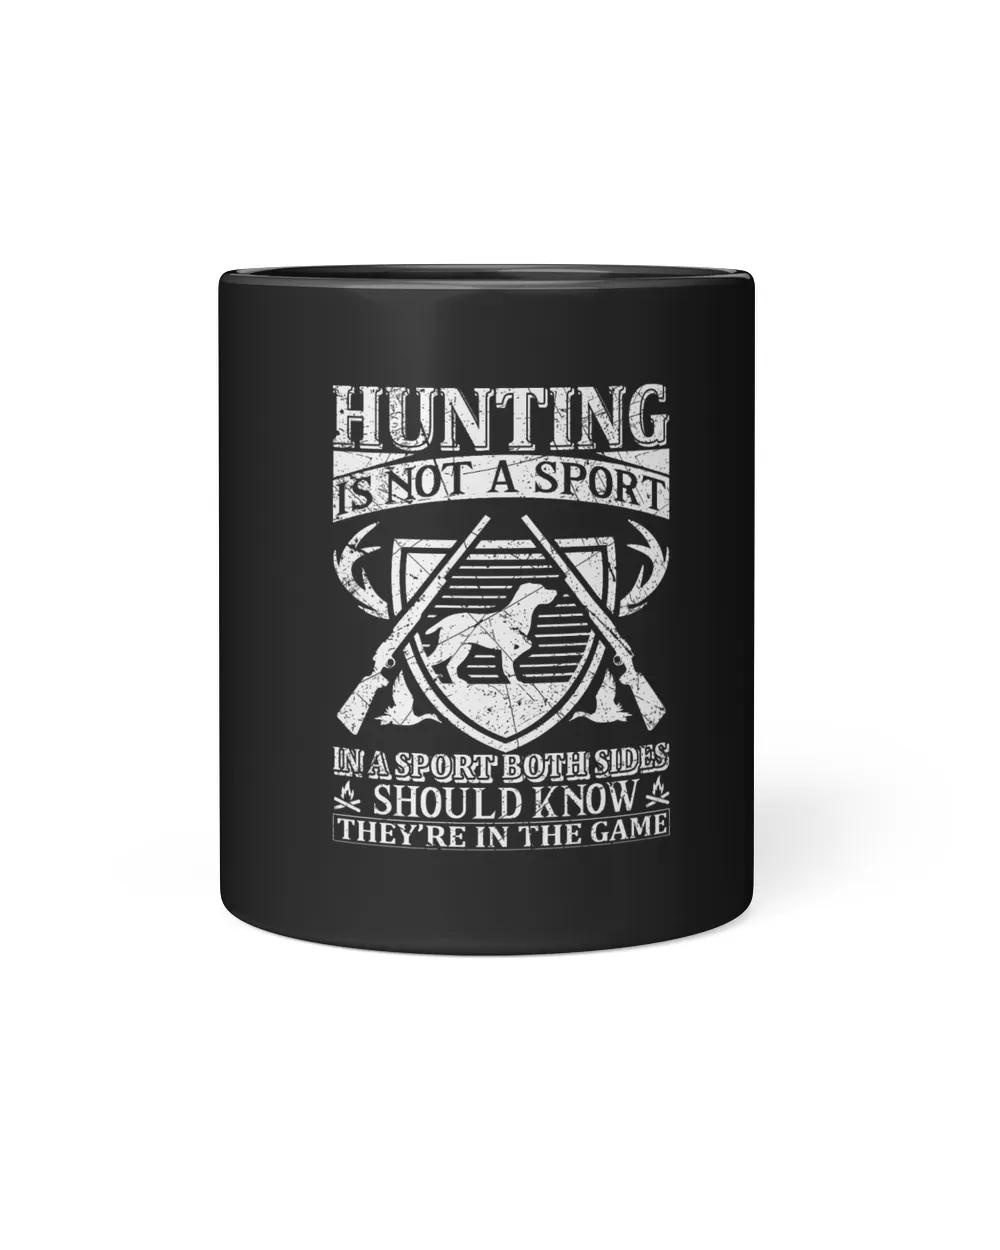 Hunting is not a sport